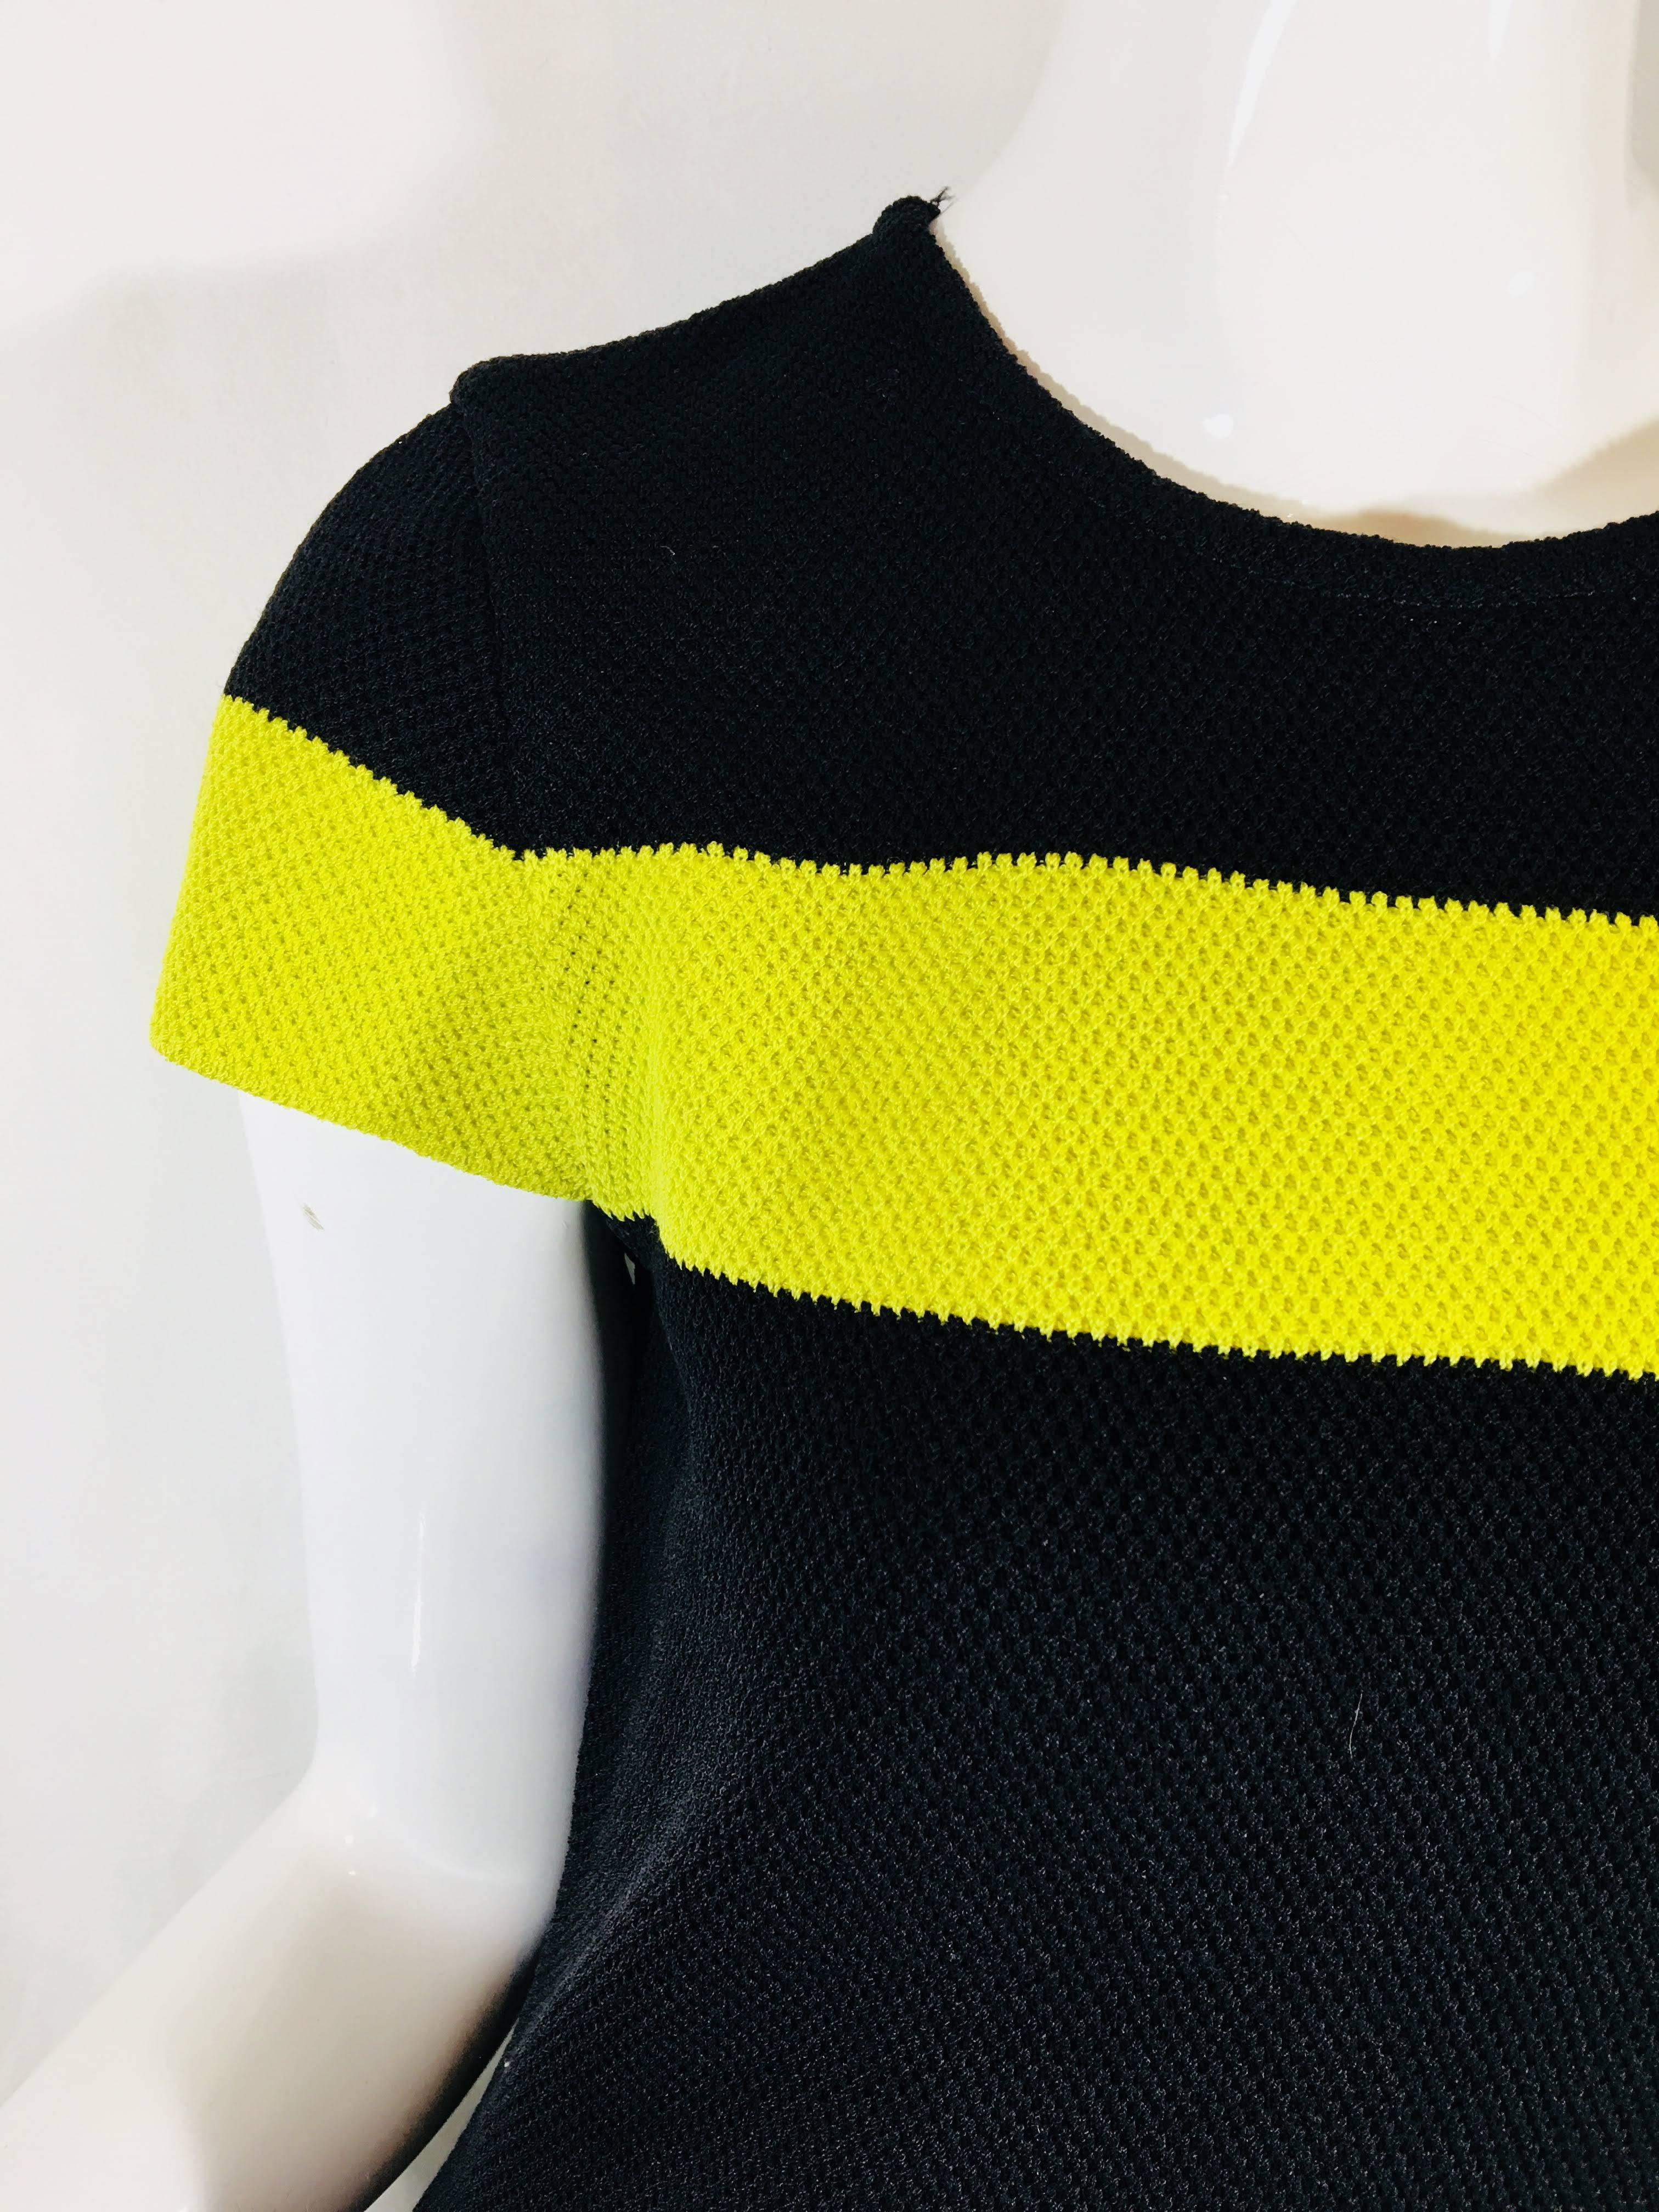 St John Knit Dress with Cap Sleeves with Yellow and Black Color Blocking Stripes.